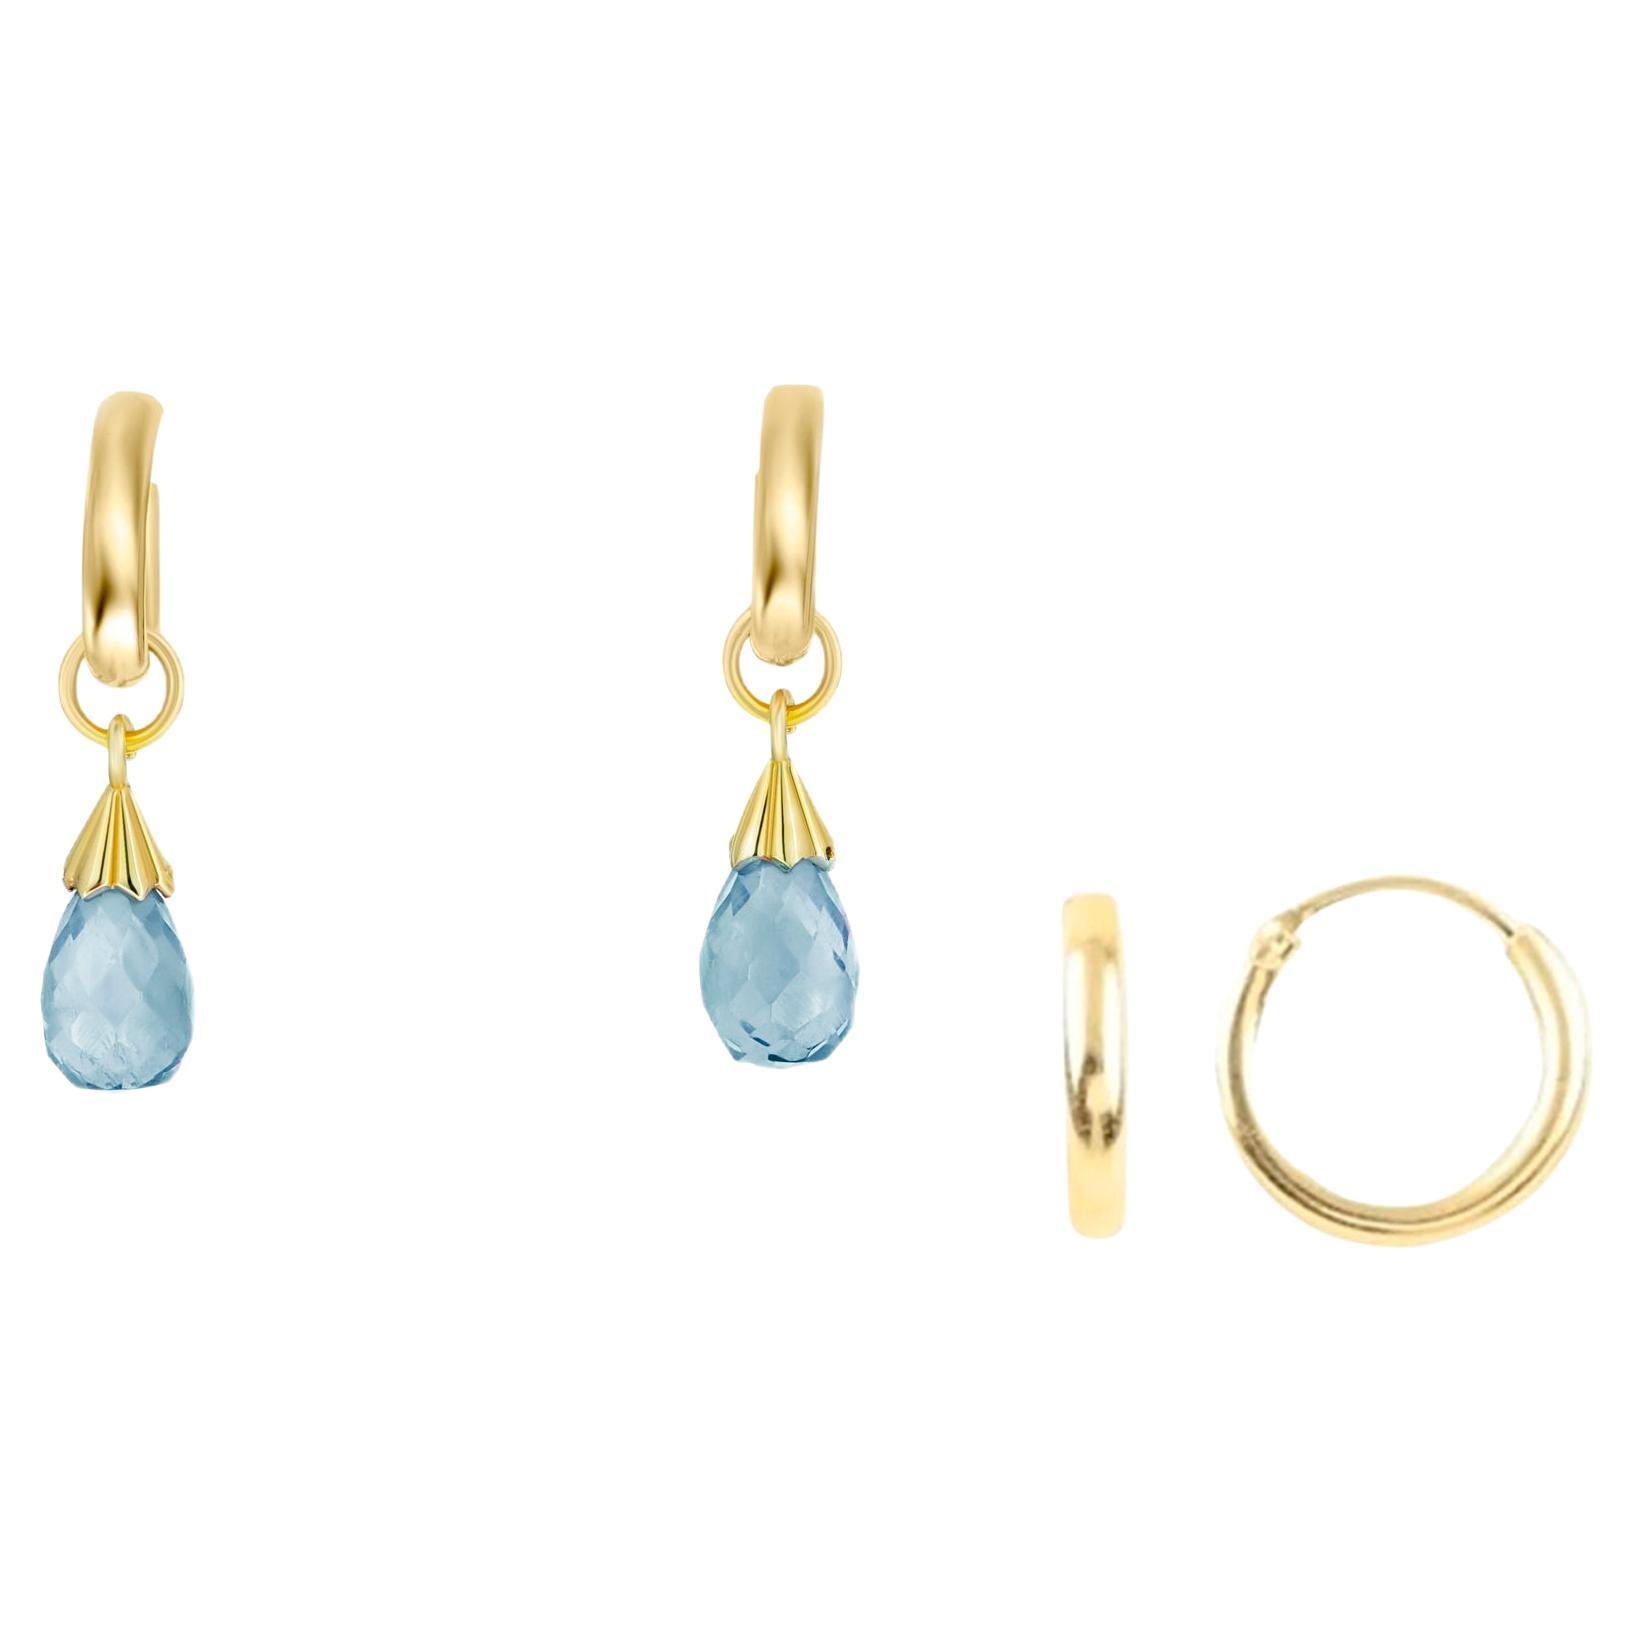 Hoop Earrings and Topazs Briolette Charms in 14k Gold For Sale